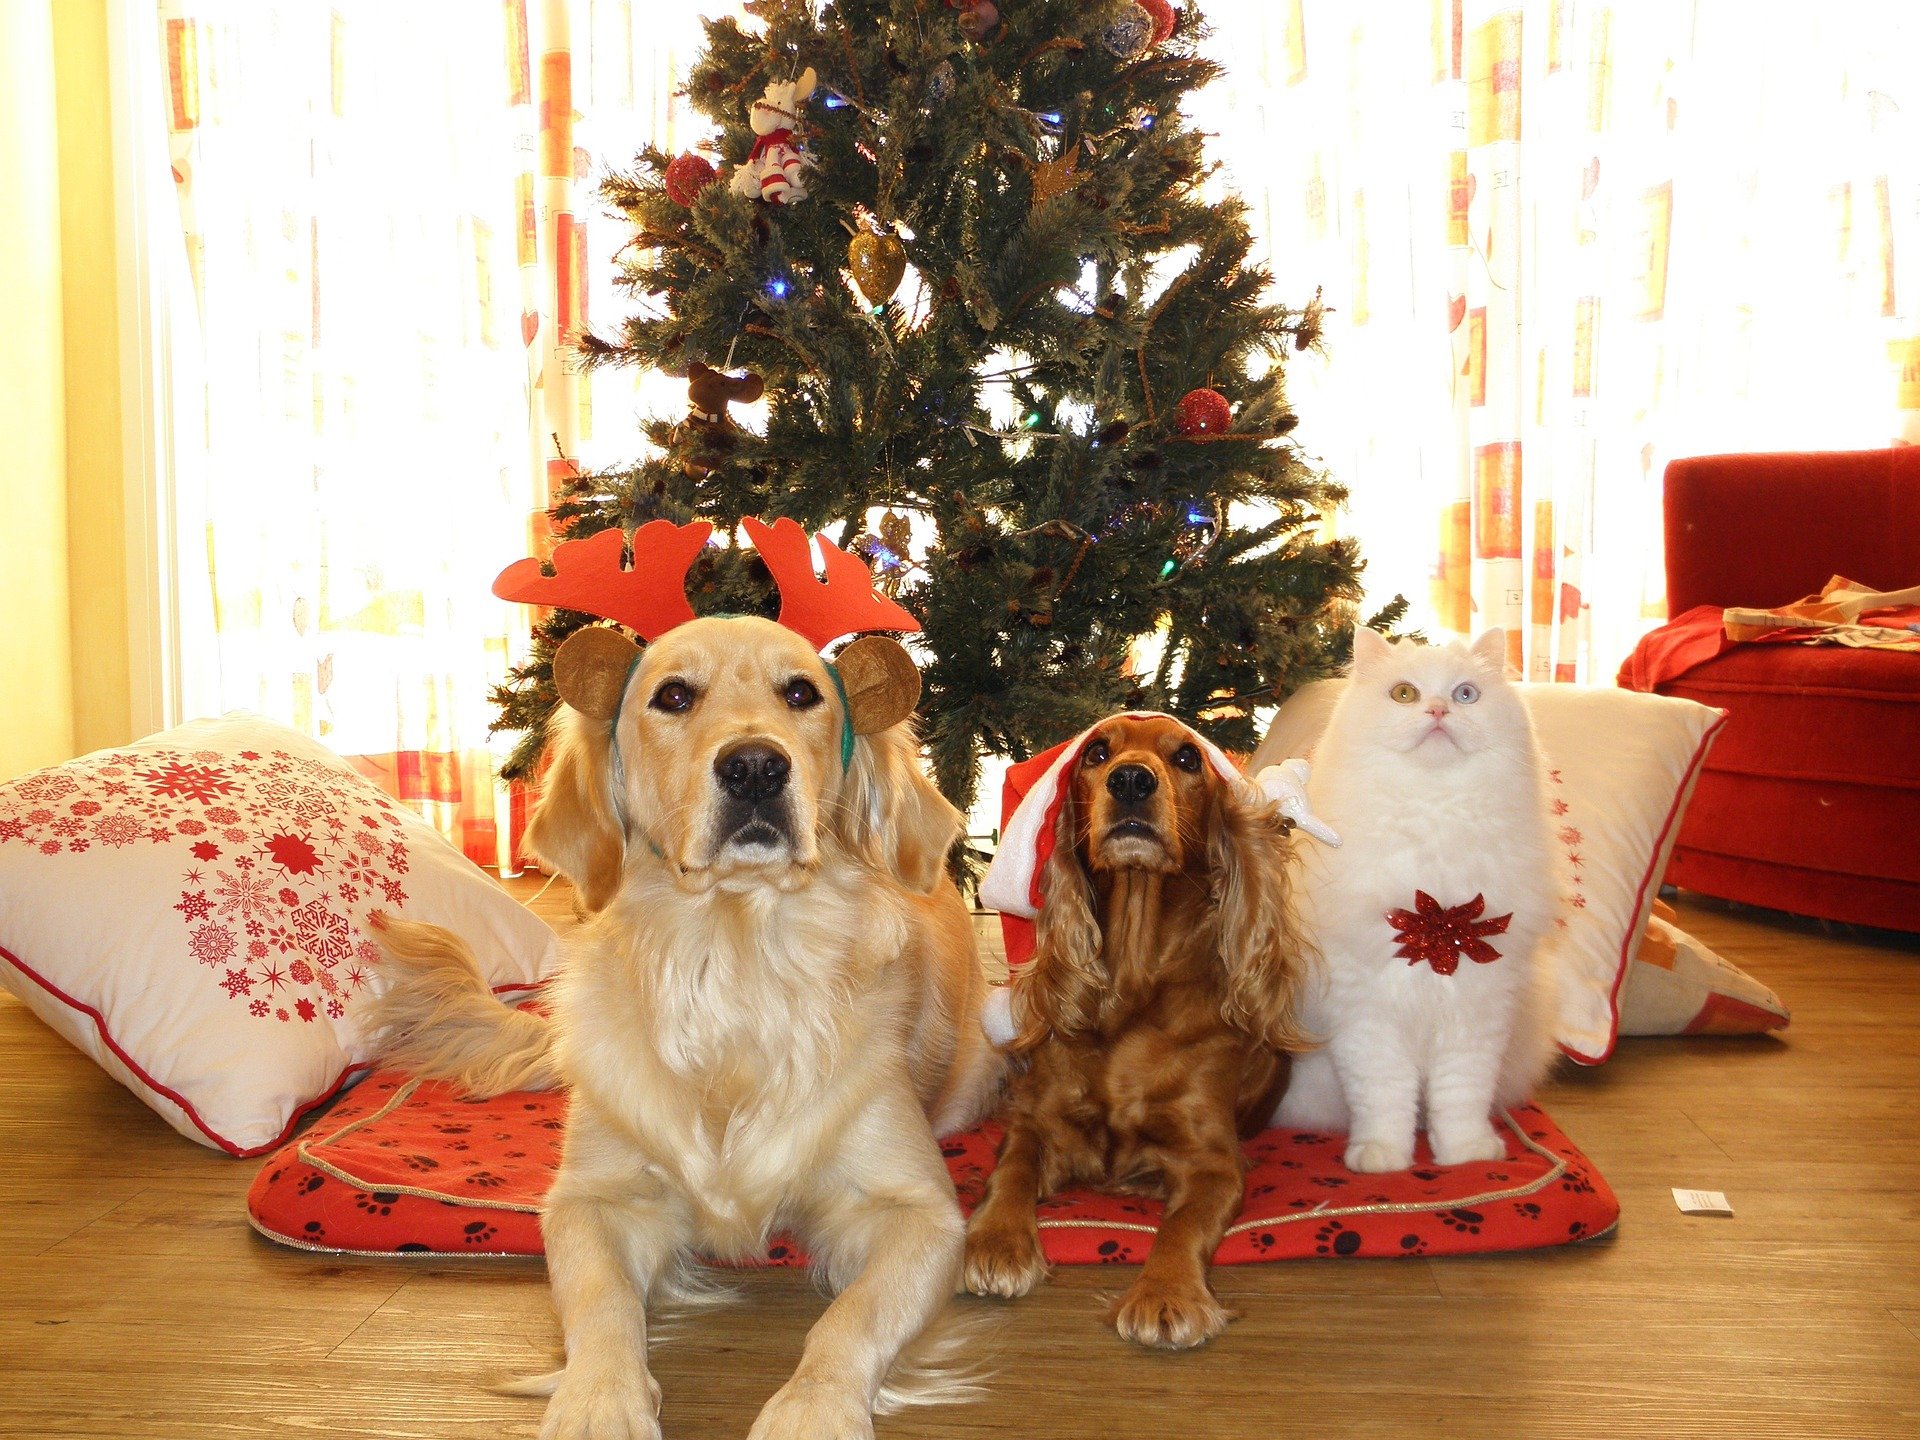 At Christmas with your furry friends